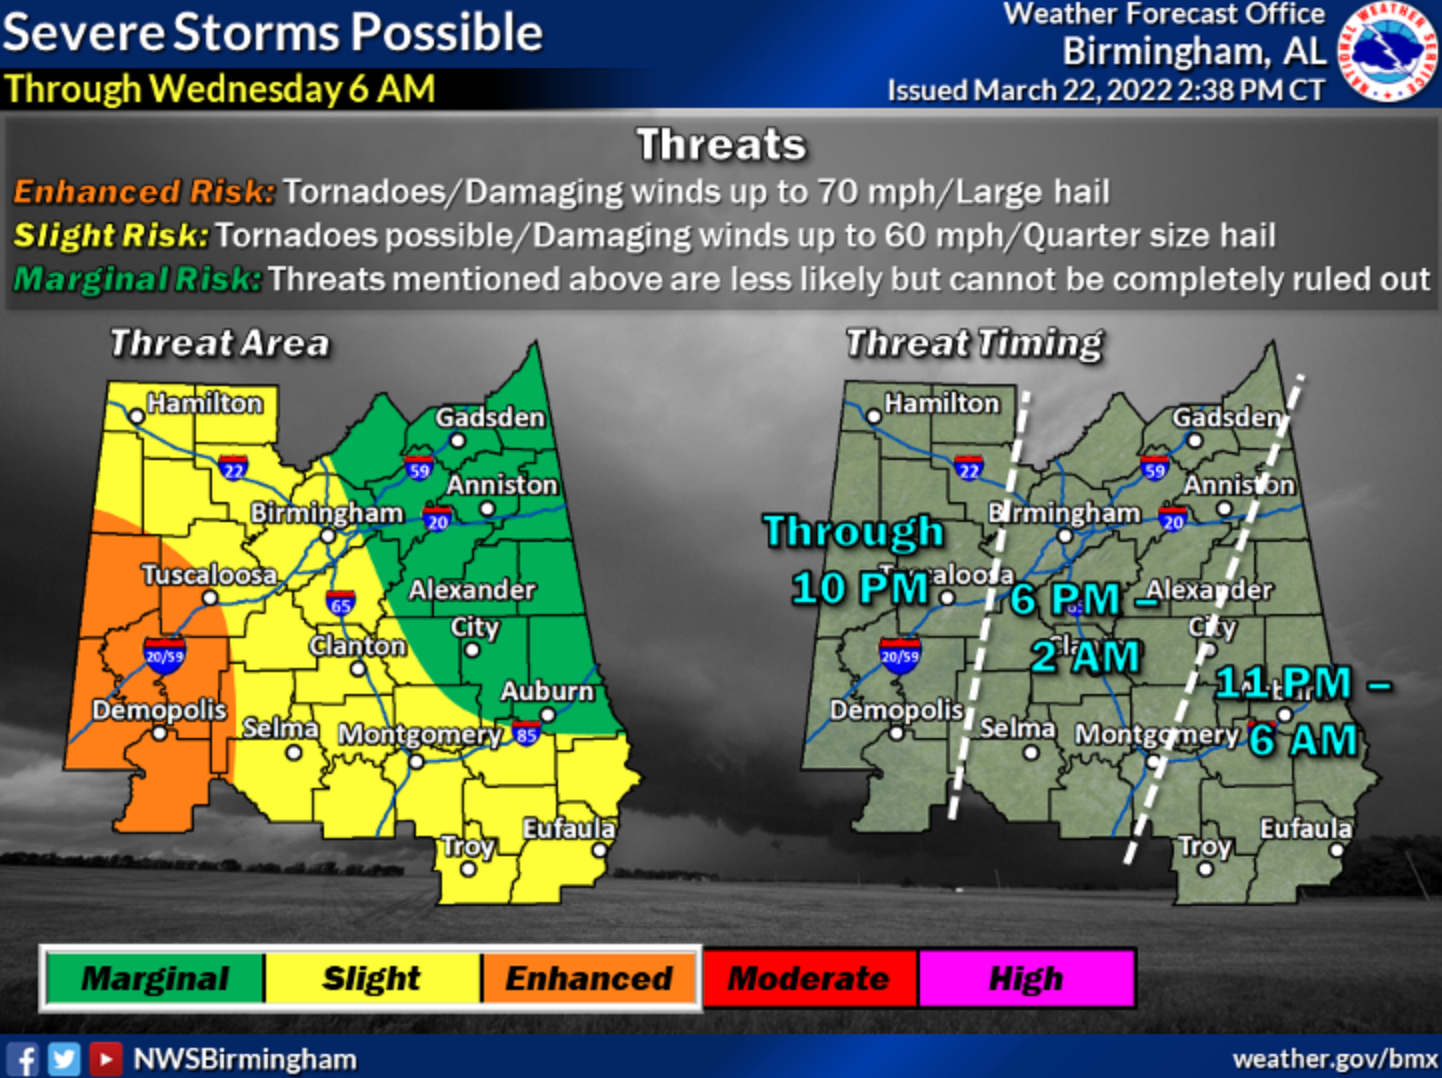 National Weather Service issued a tornado watch for Central Alabama